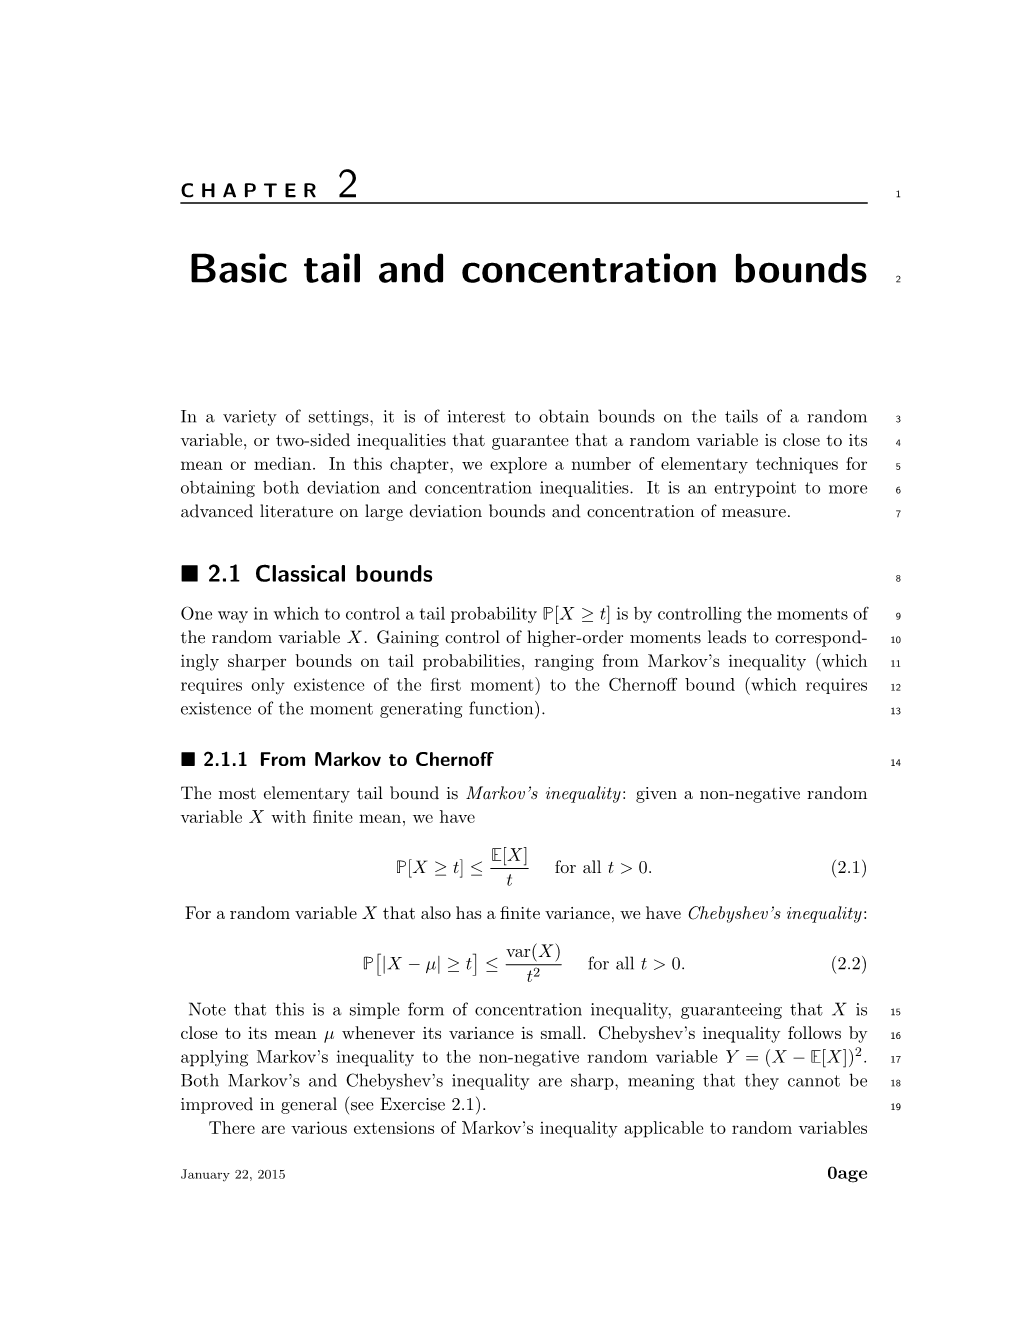 Basic Tail and Concentration Bounds 2